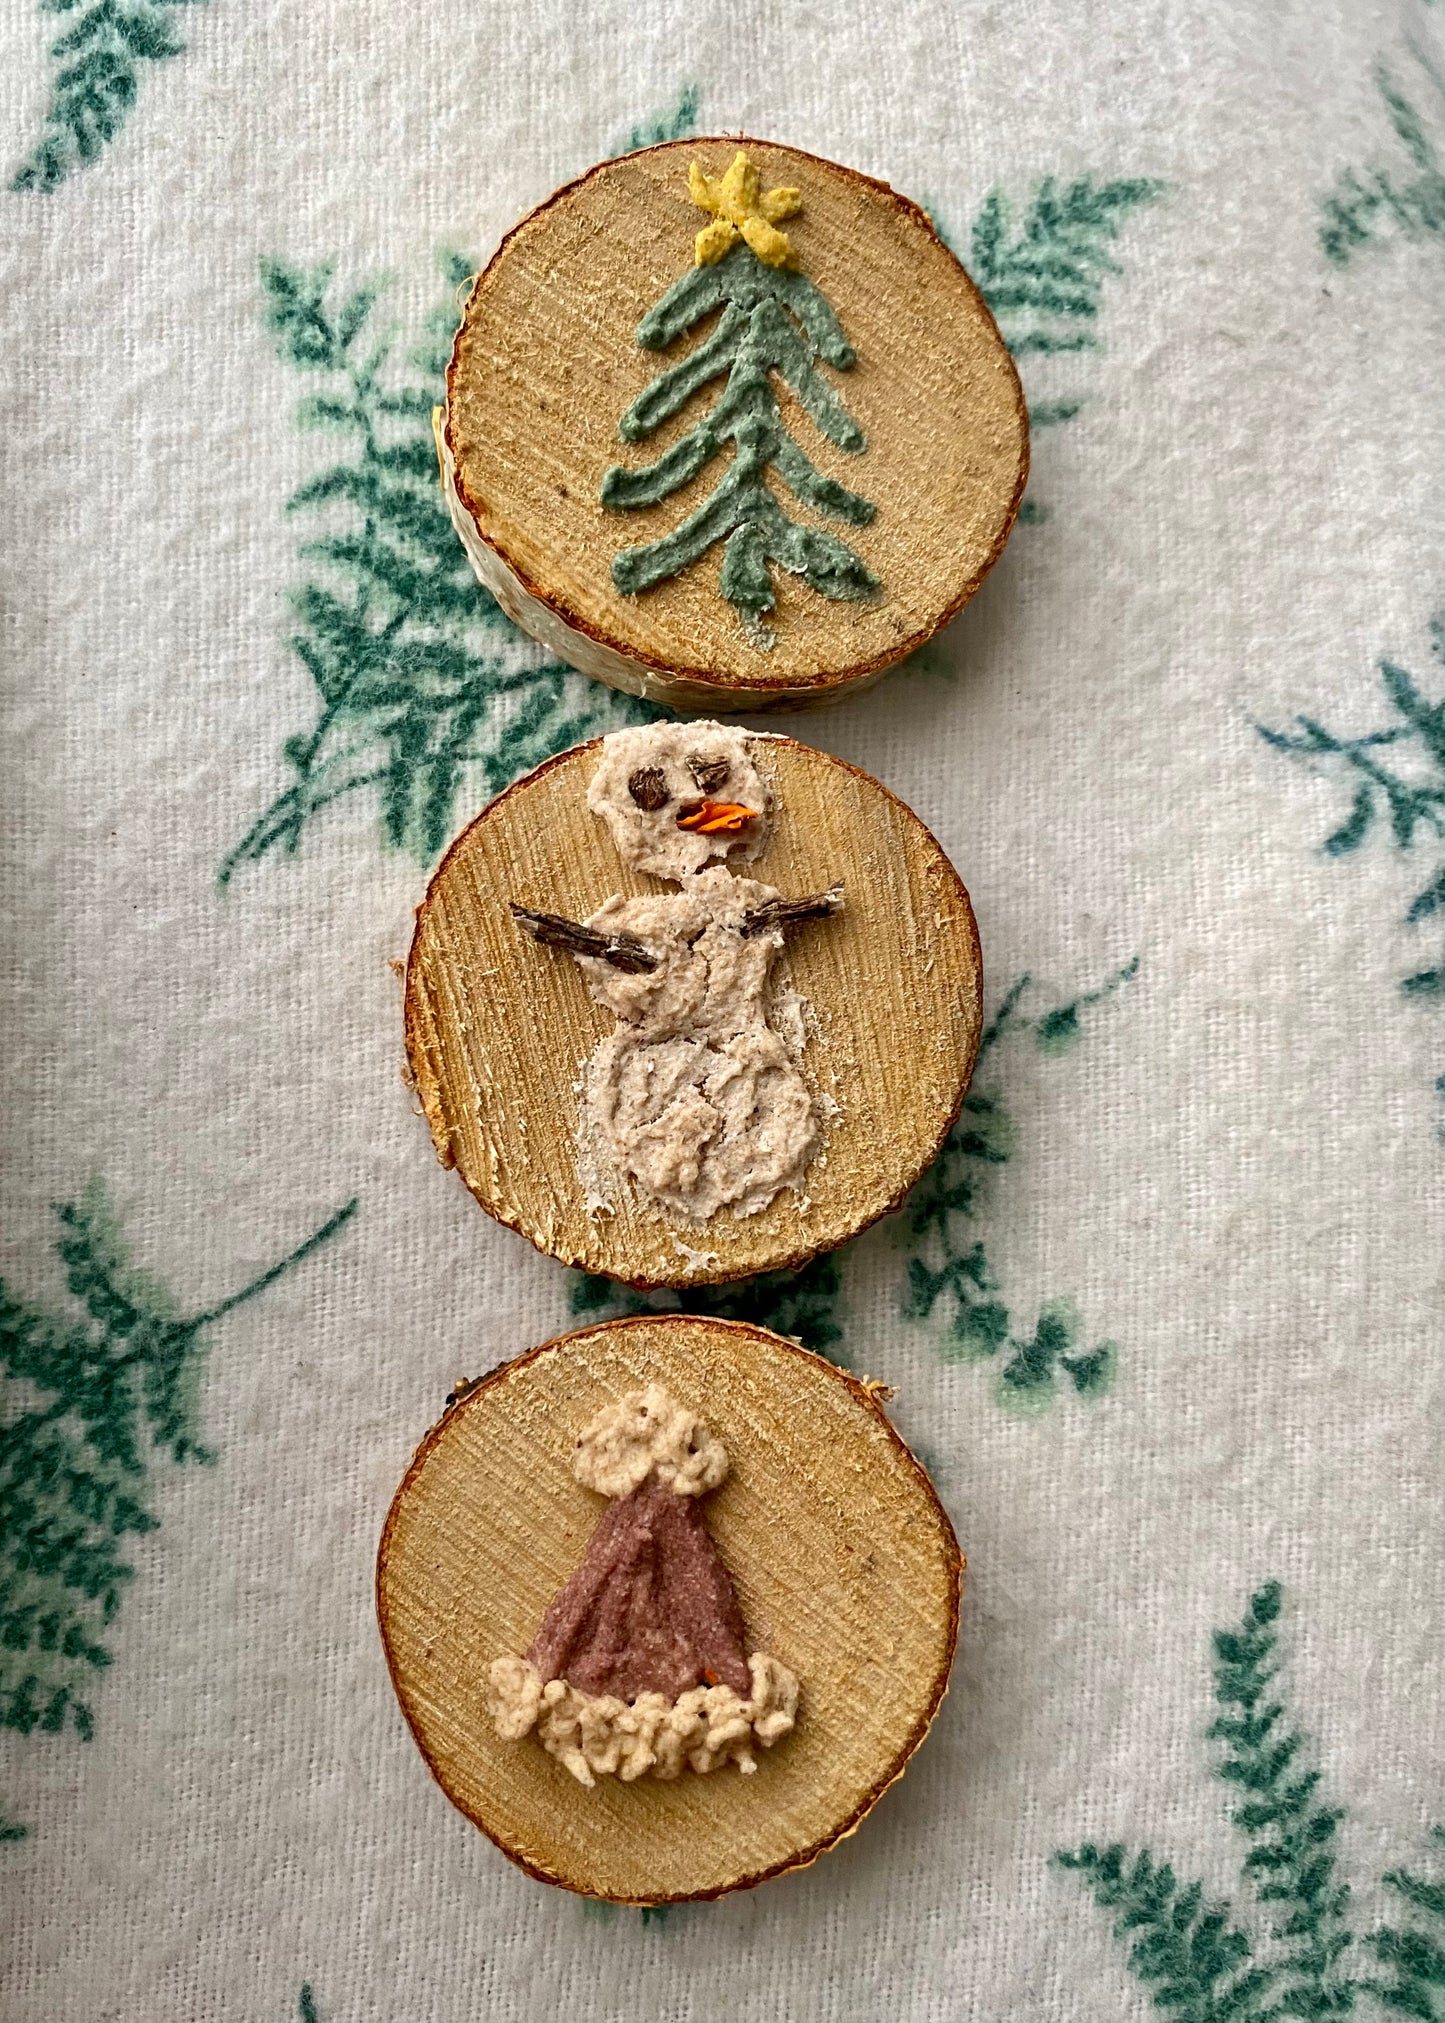 
Delicious Assorted Festive Organic Wood Slices